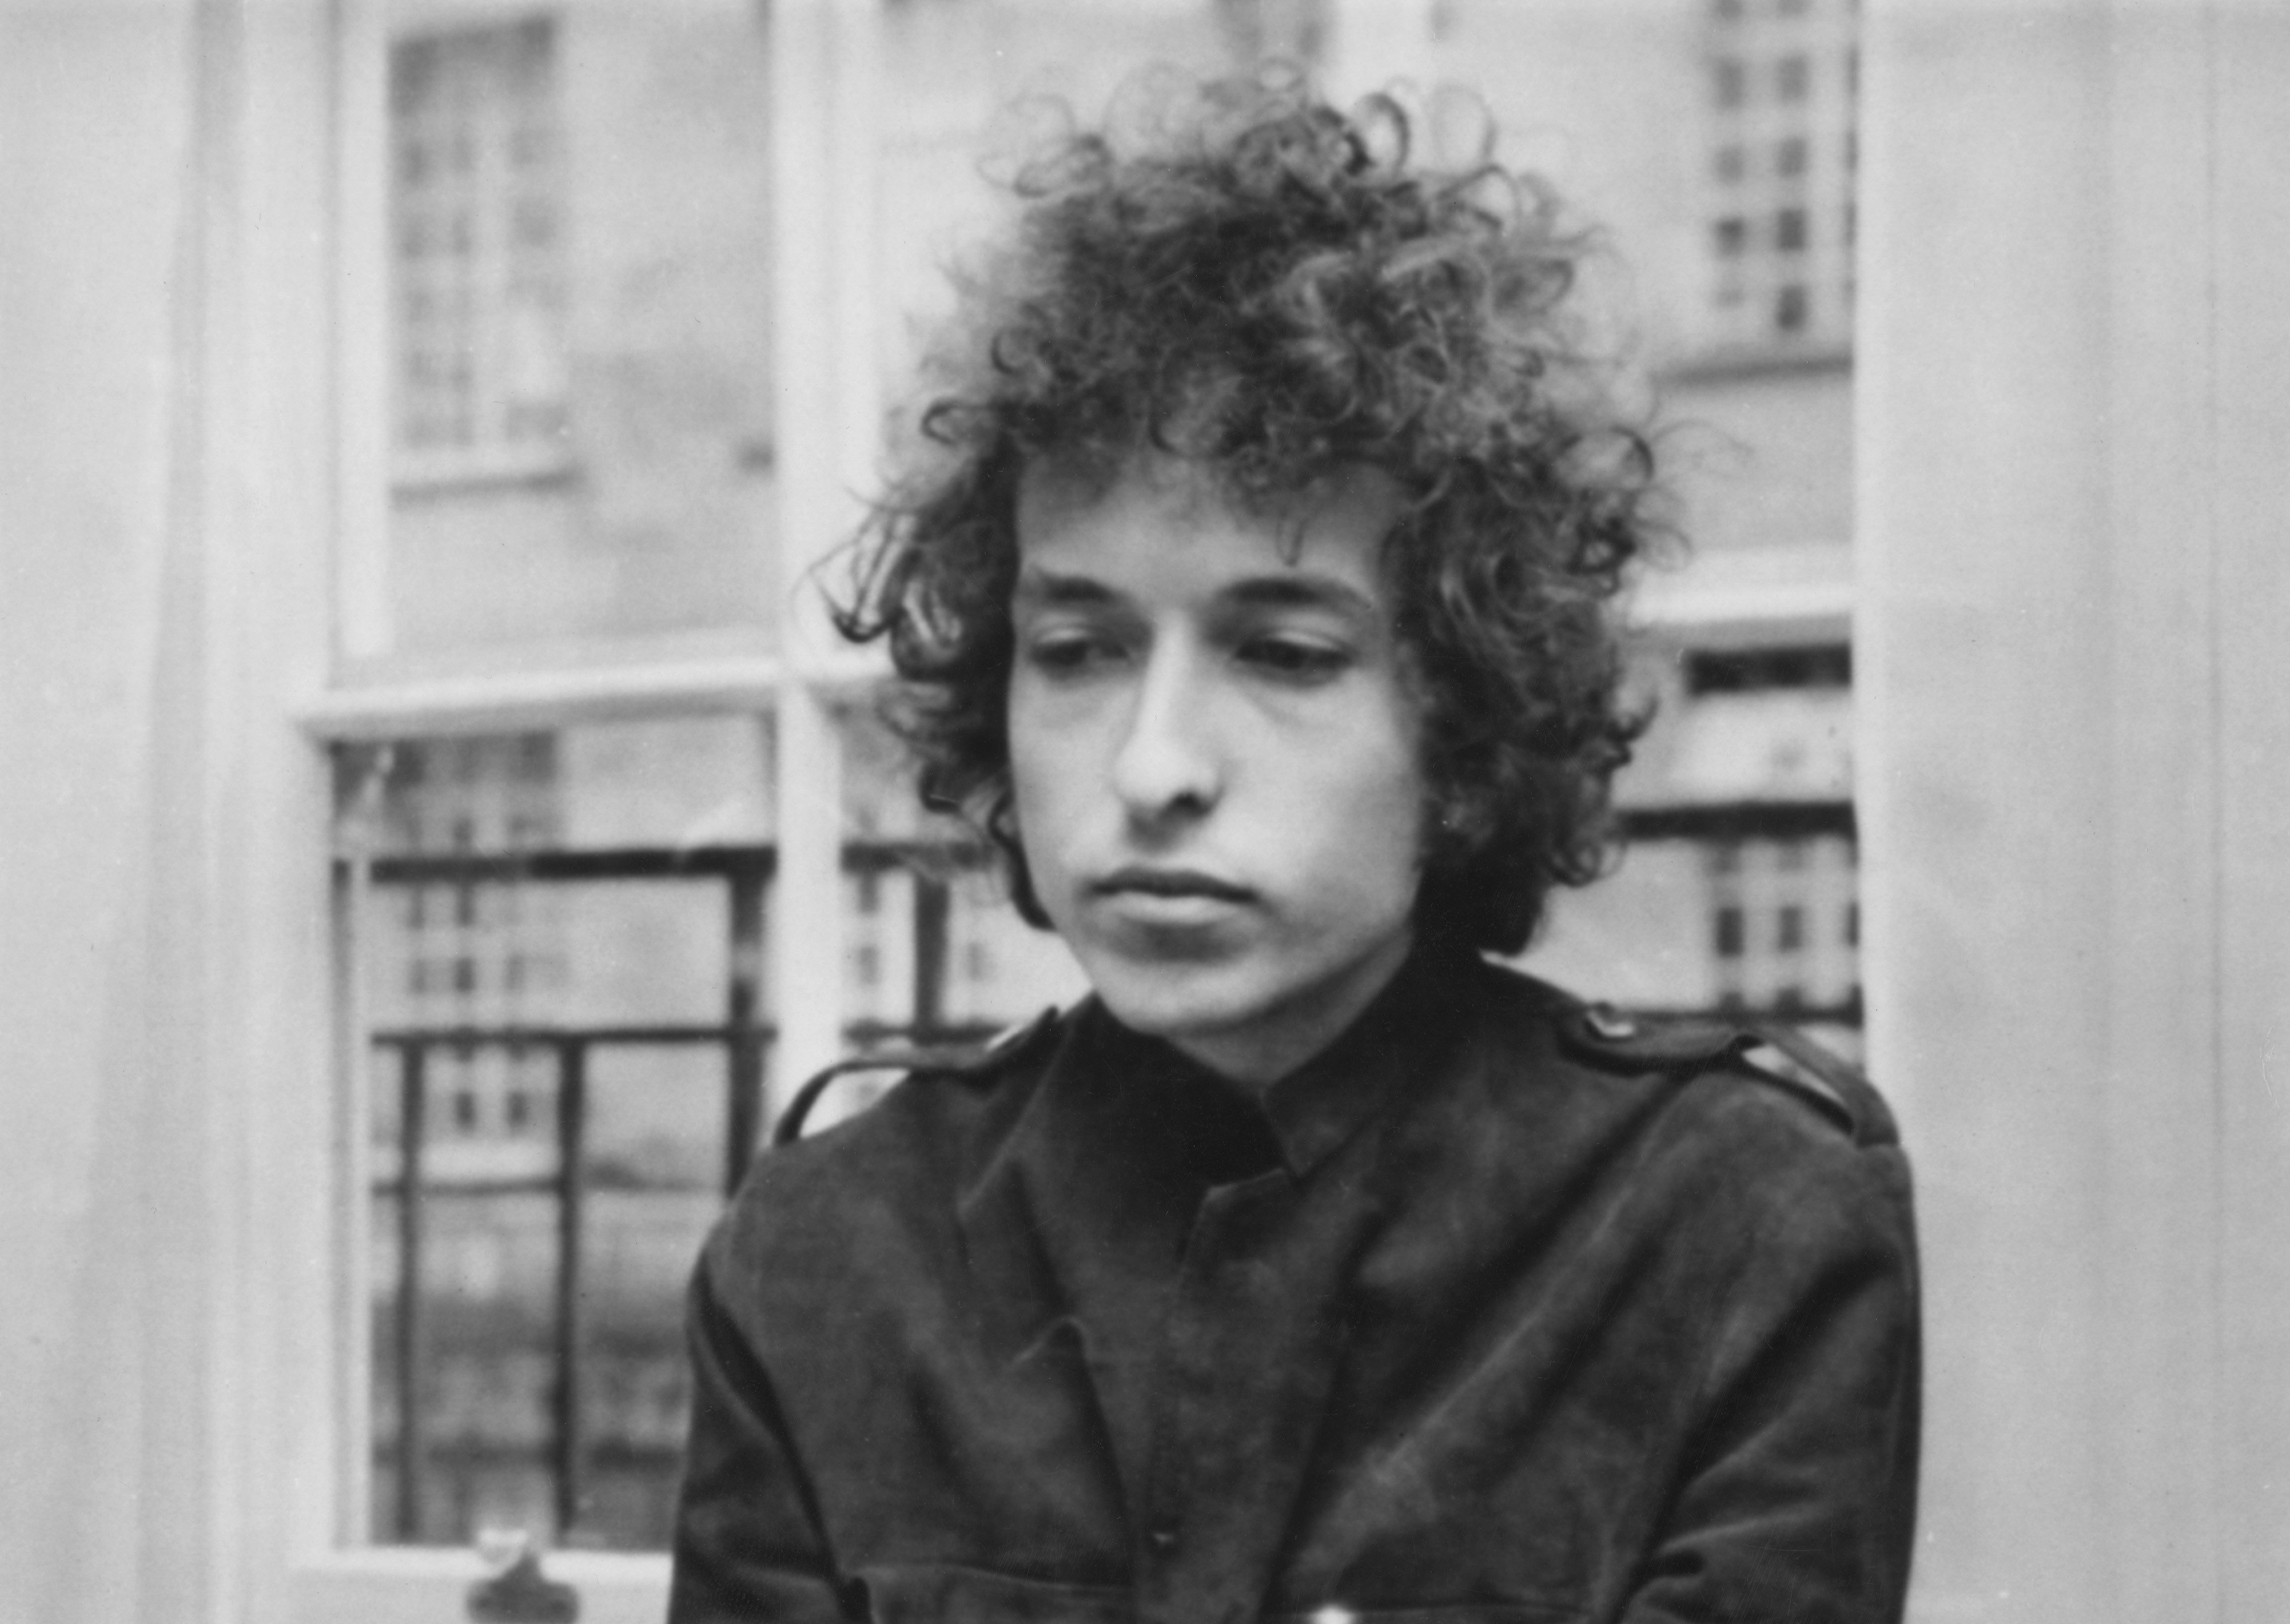 A black and white picture of Bob Dylan standing in front of a window.